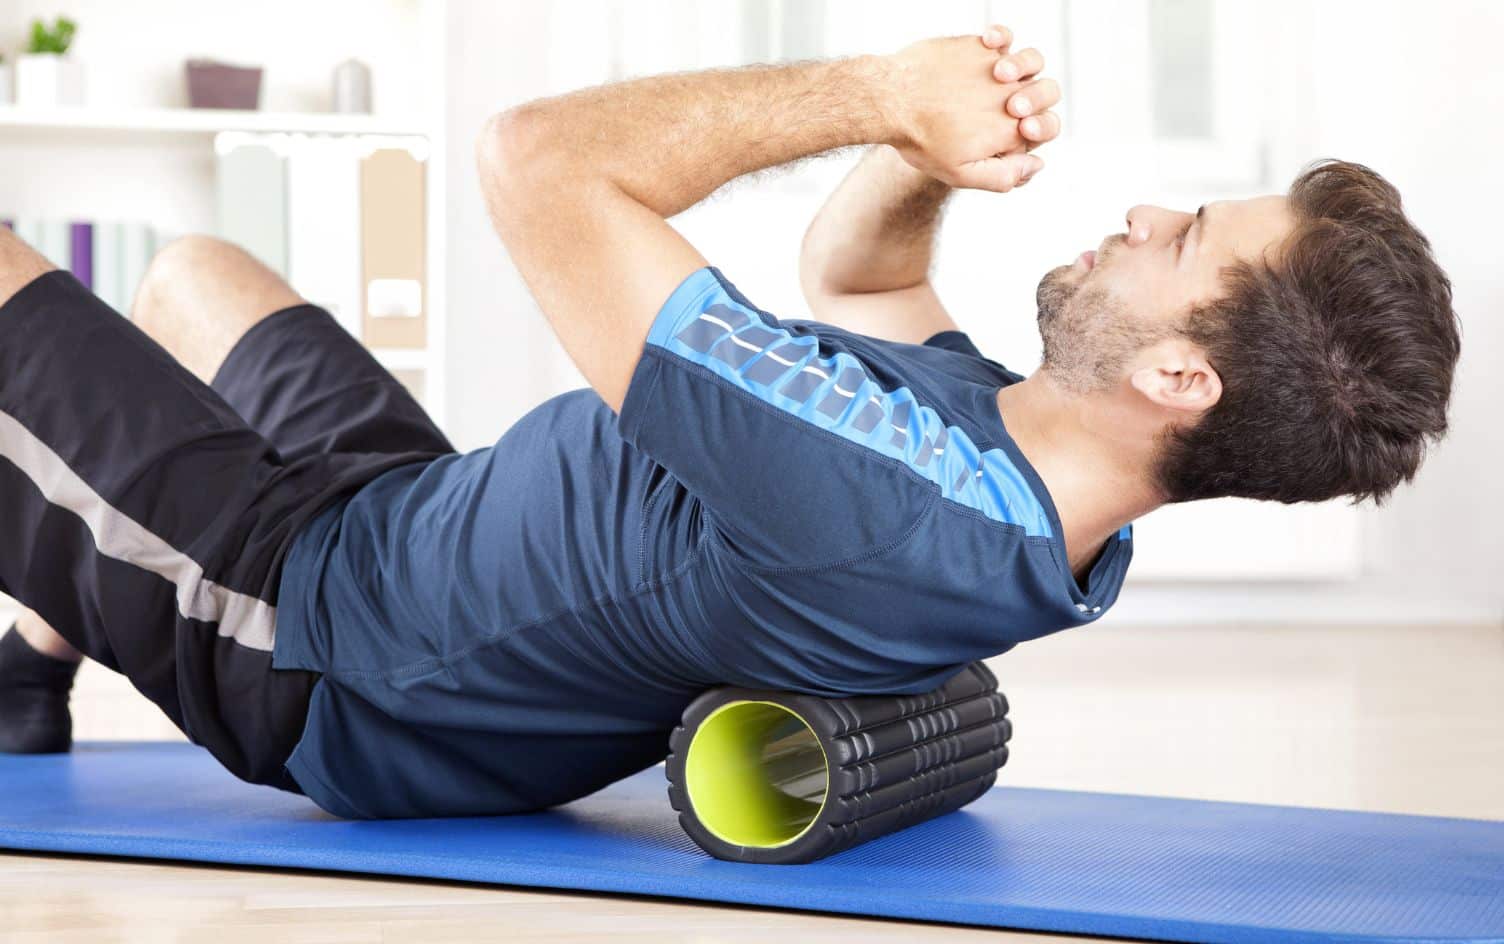 https://blog.myfitnesspal.com/wp-content/uploads/2018/07/Foam-Rolling-10-Things-to-Do-Before-During-and-After-Every-Workout.jpg